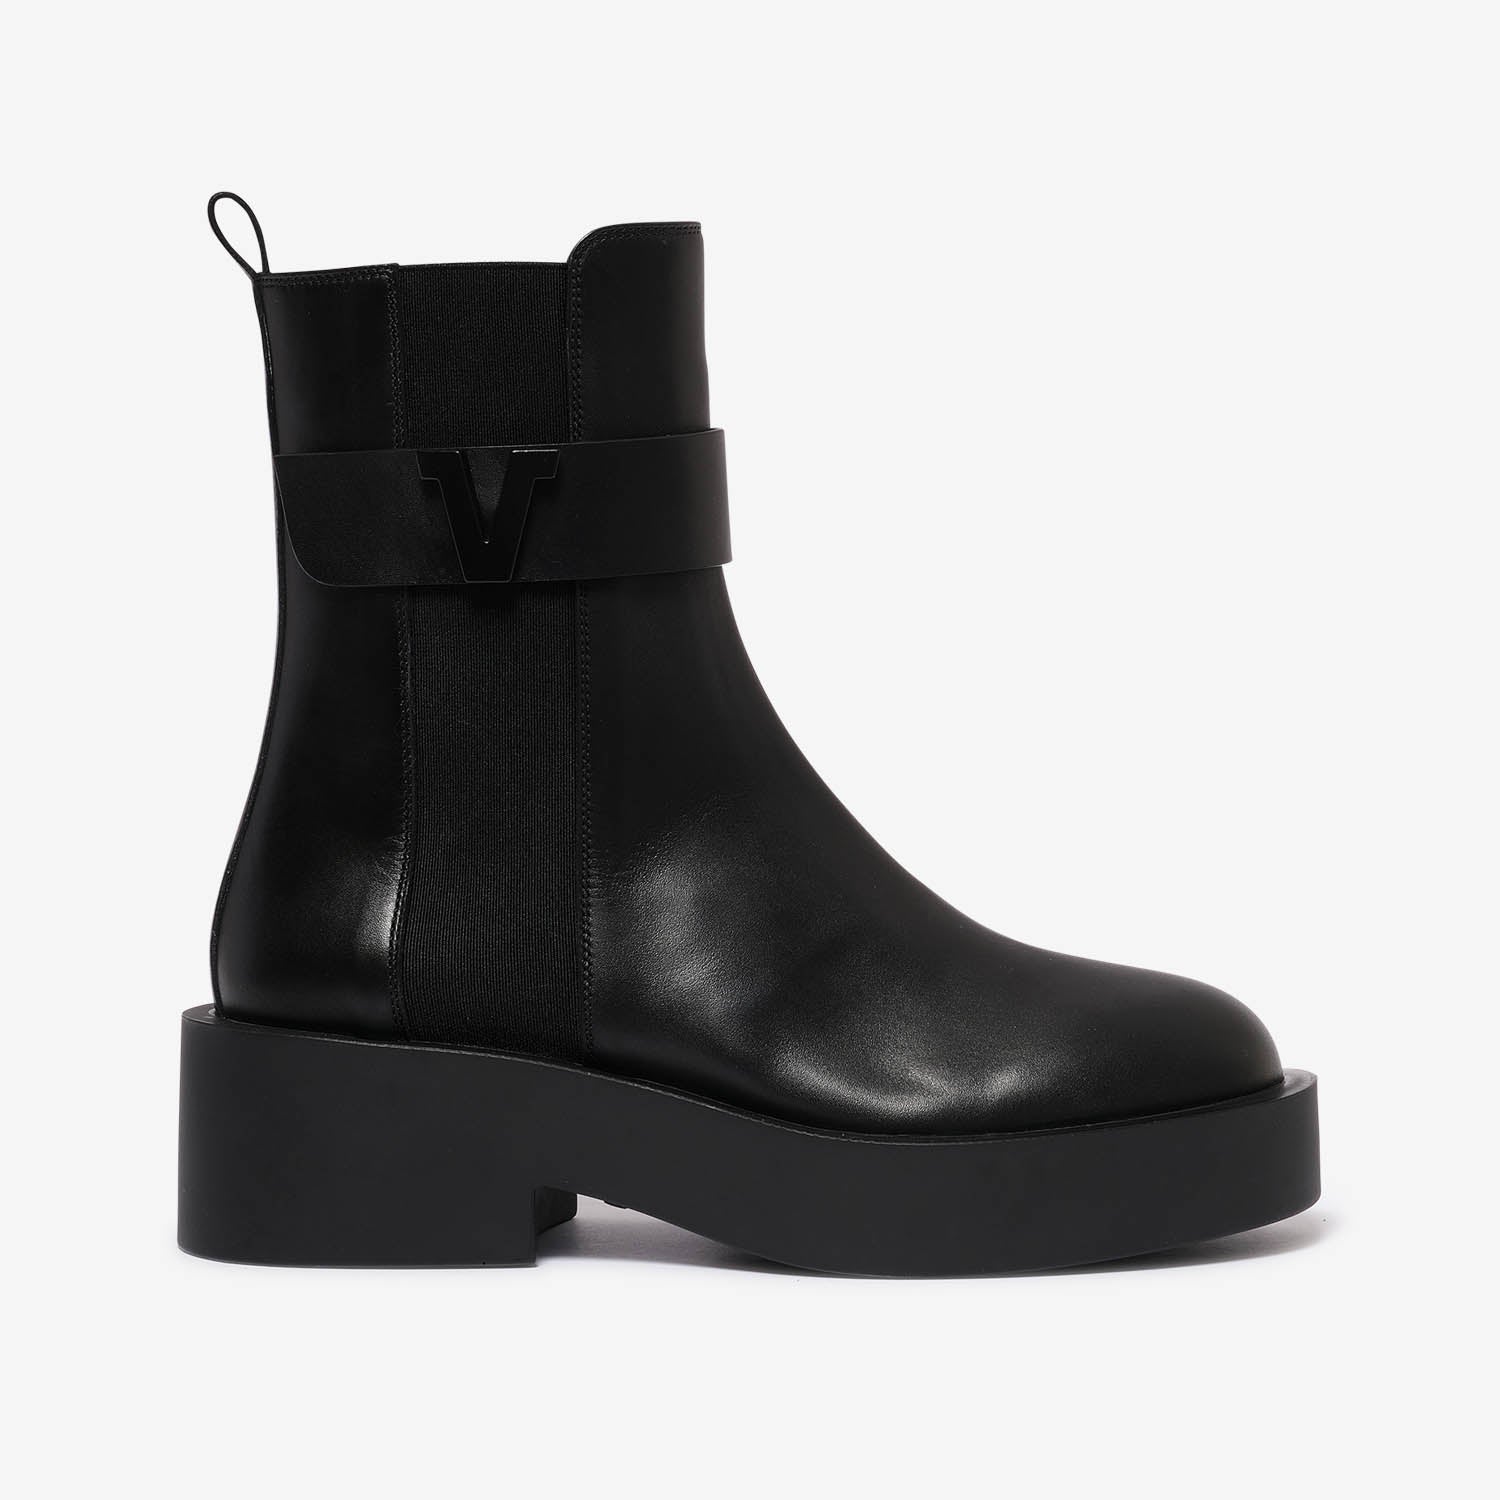 Aelia | Women's leather ankle boot wool lining